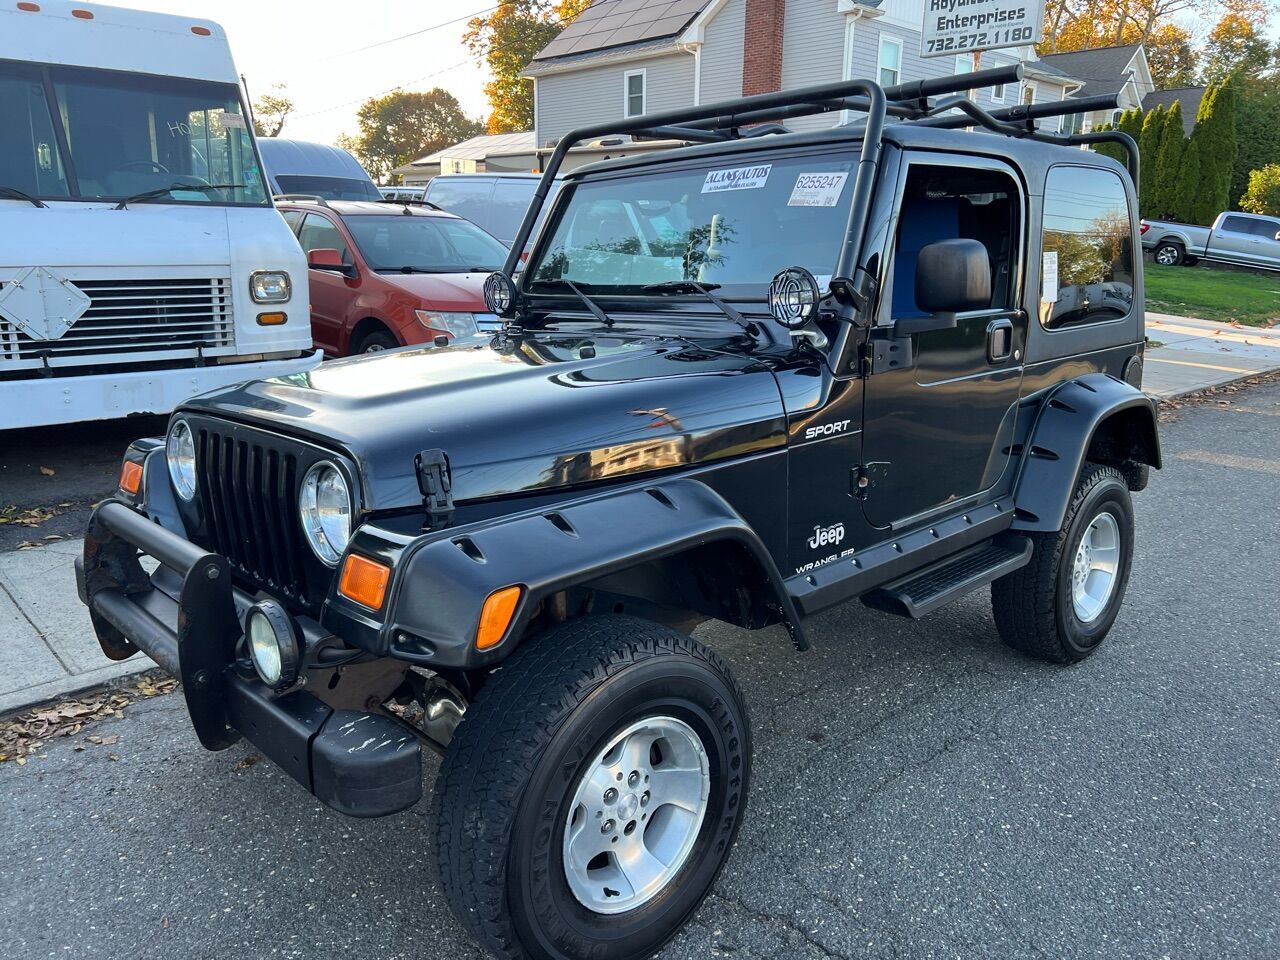 2003 Jeep Wrangler For Sale In New Jersey ®